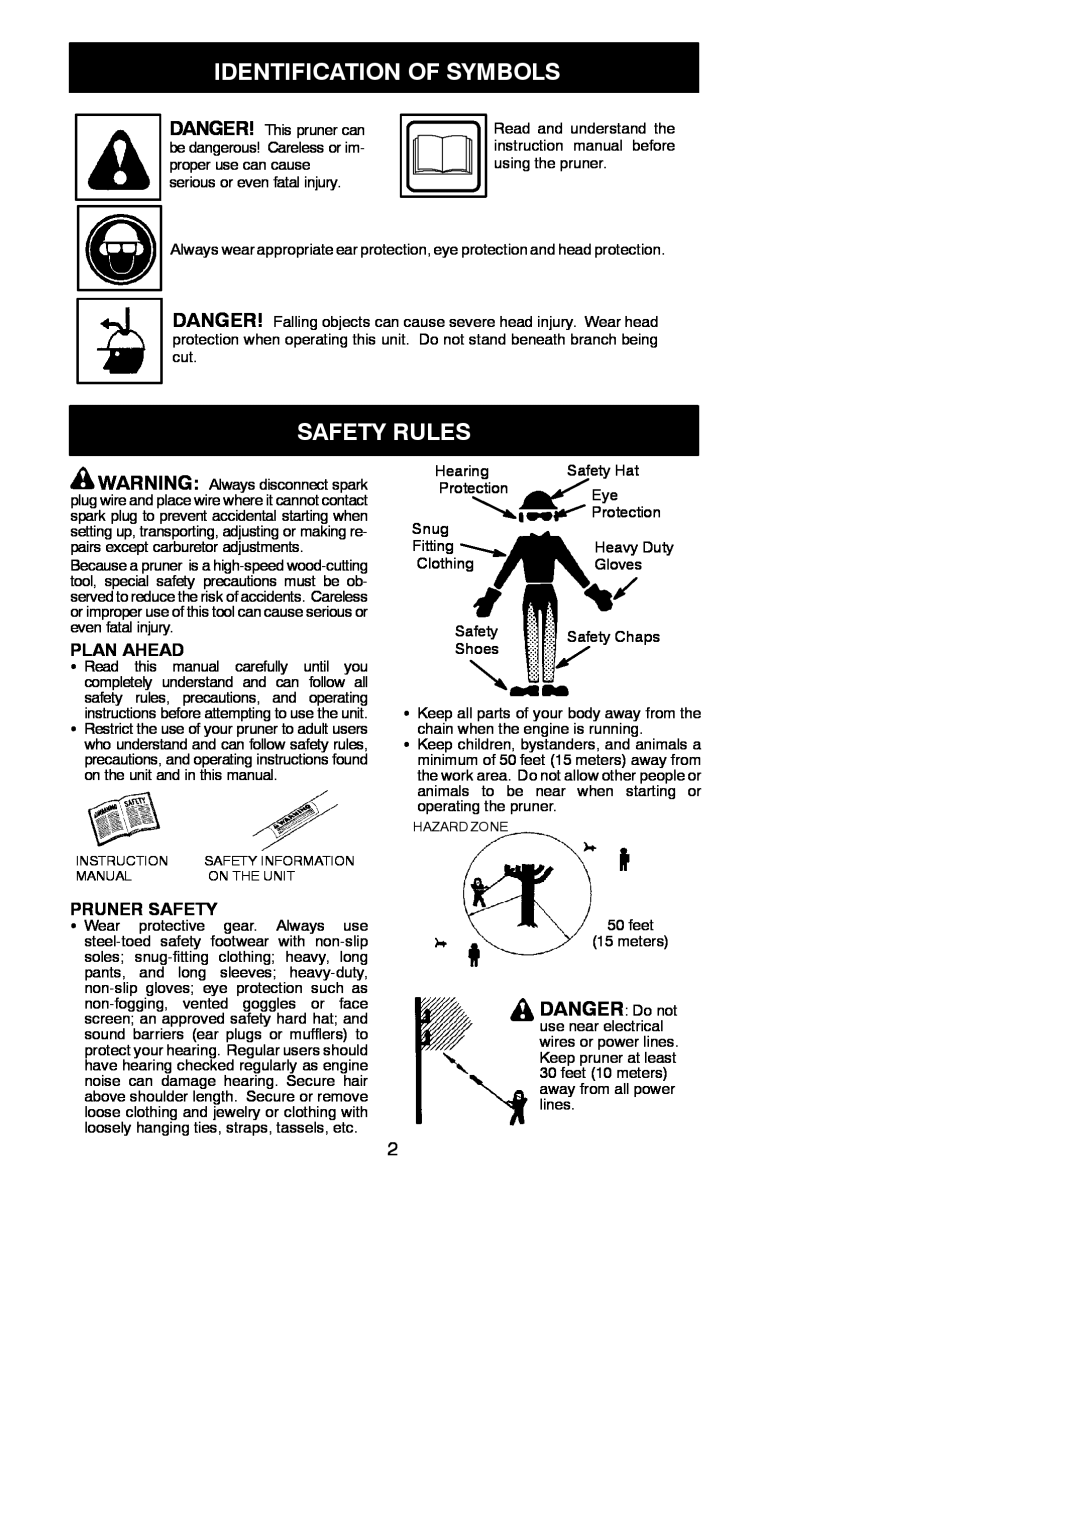 Poulan 530165221 instruction manual Identification Of Symbols, Safety Rules, Plan Ahead, Pruner Safety 